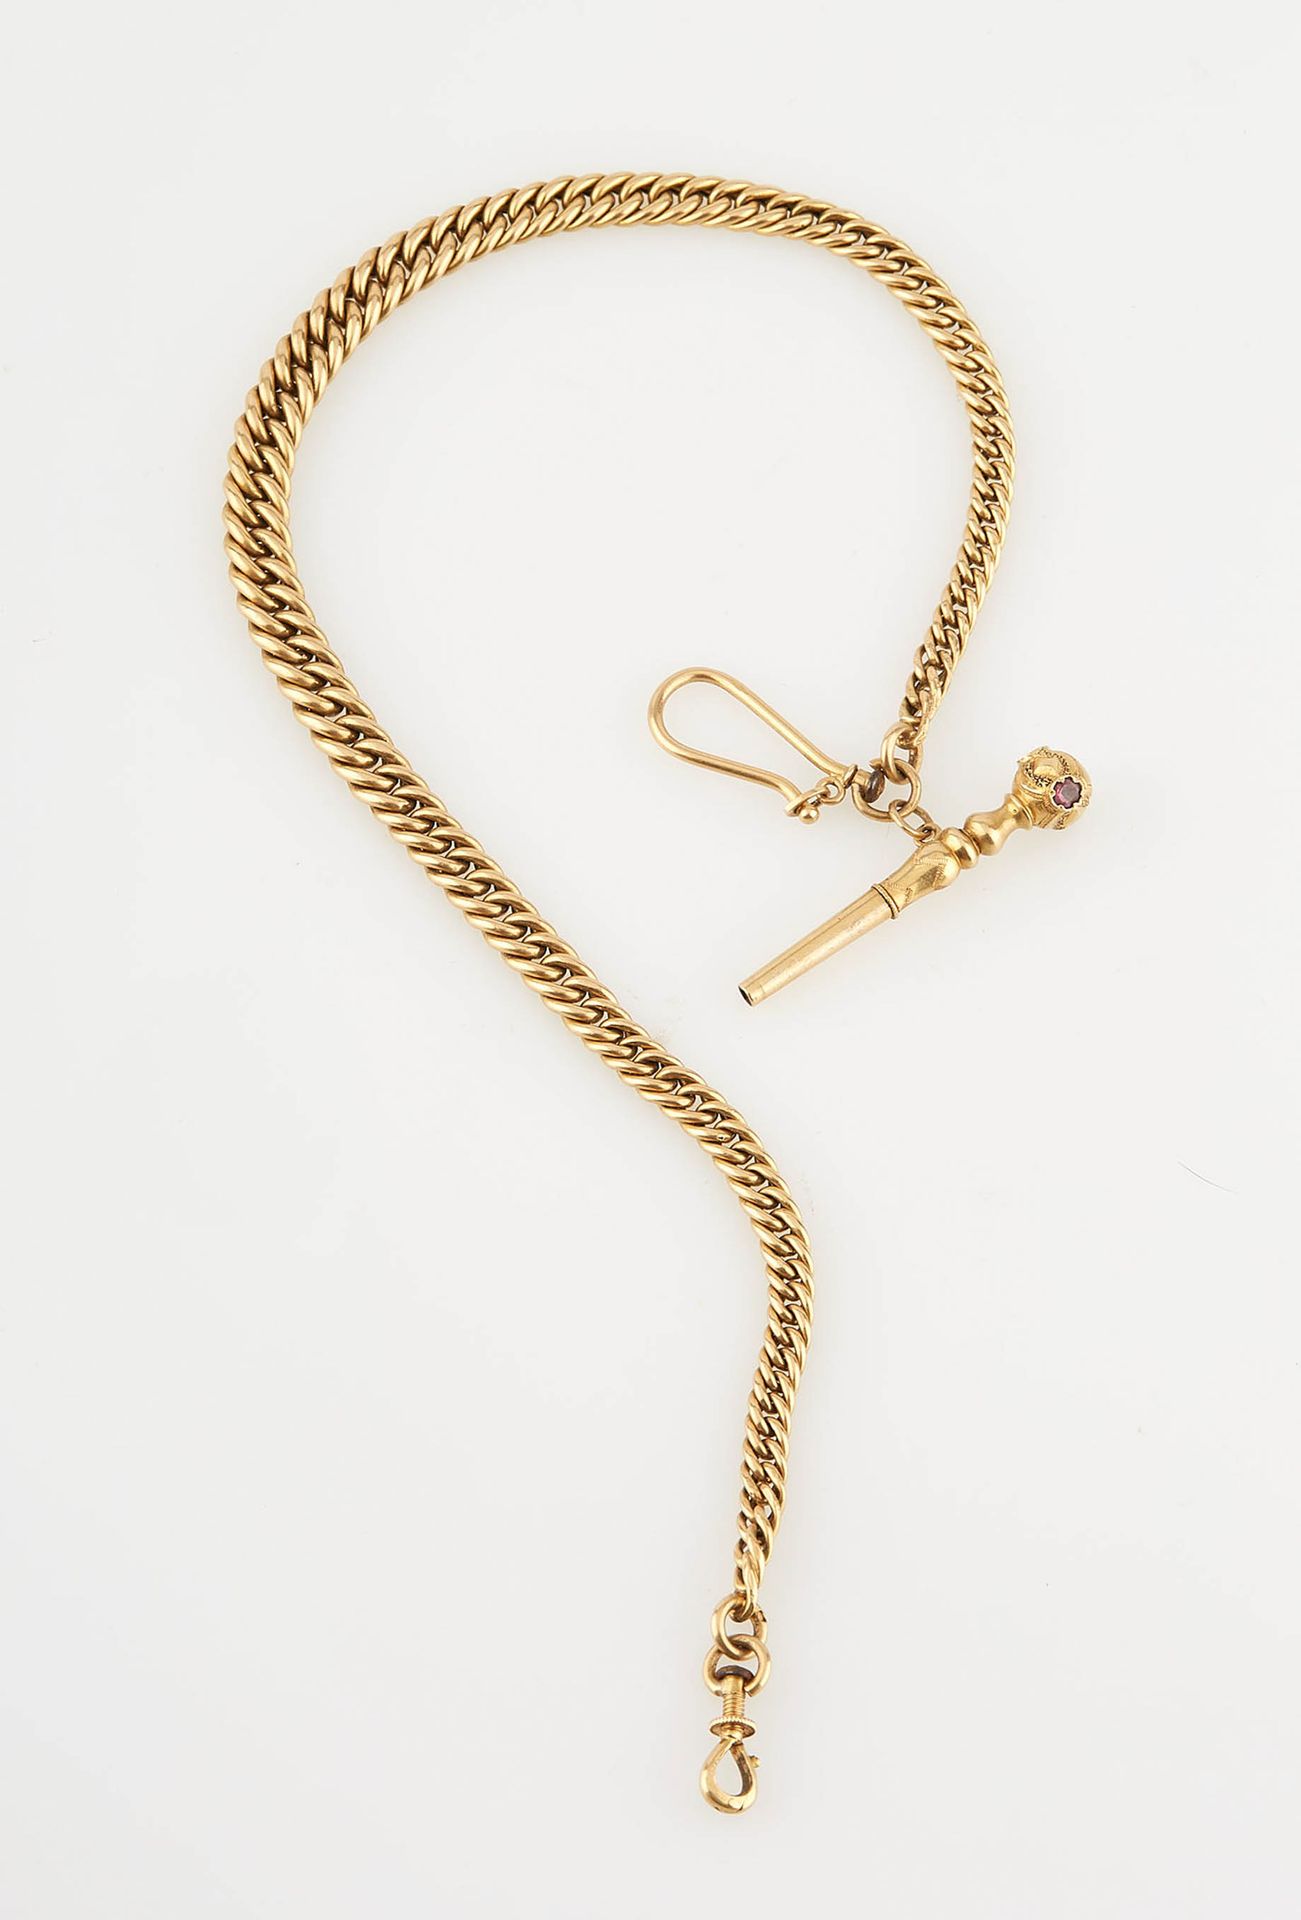 Null Yellow gold watch chain with a key. Length : 27 cm. Weight : 14,50 g.